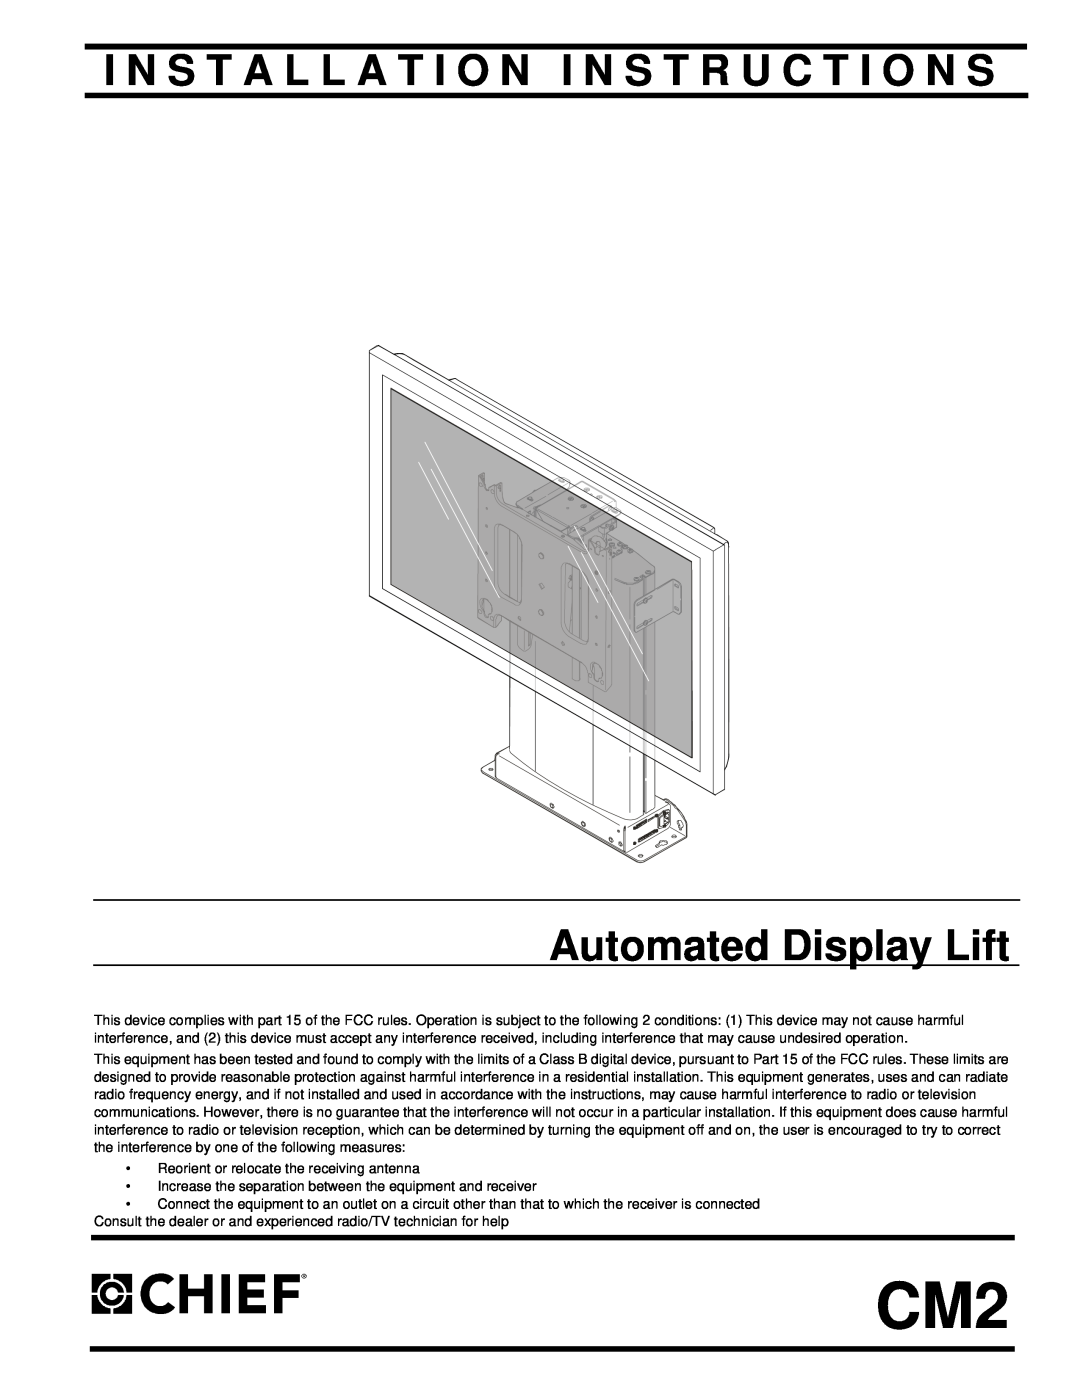 Chief Manufacturing CM2 installation instructions I N S T A L L A T I O N I N S T R U C T I O N S, Automated Display Lift 